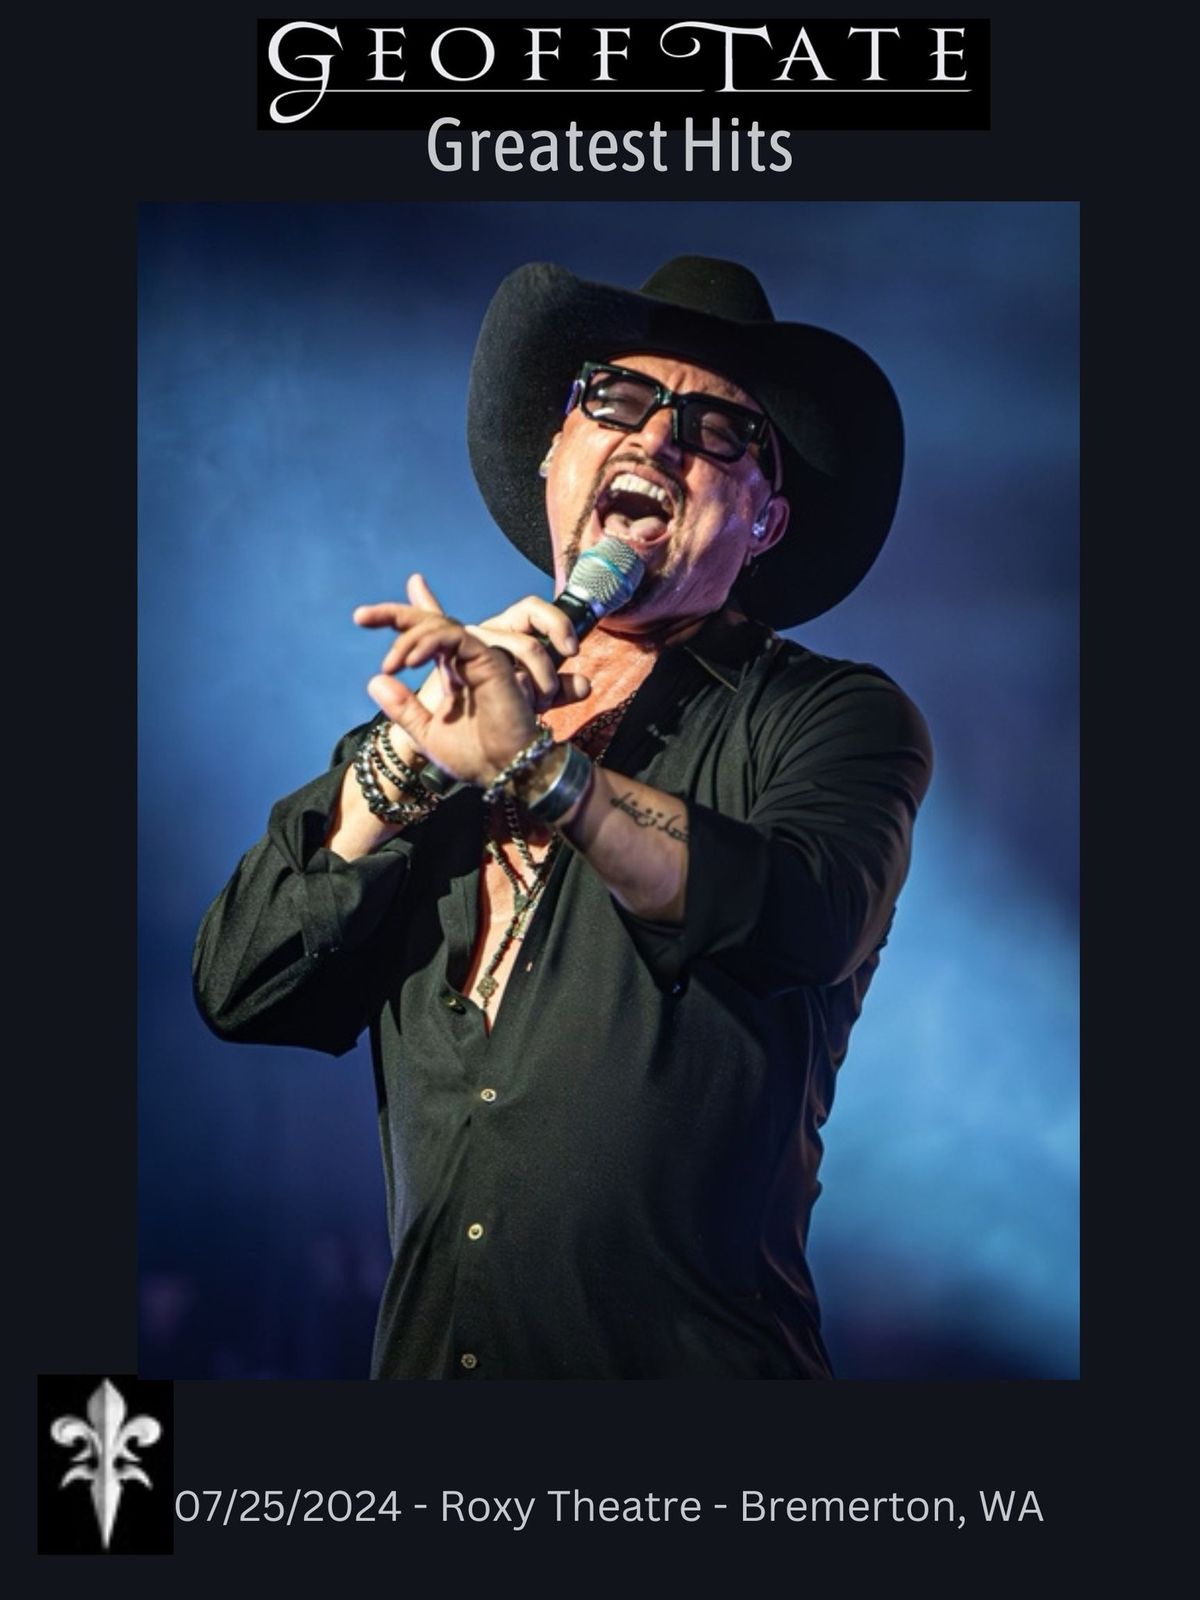 Geoff Tate's Greatest Hits Tour 